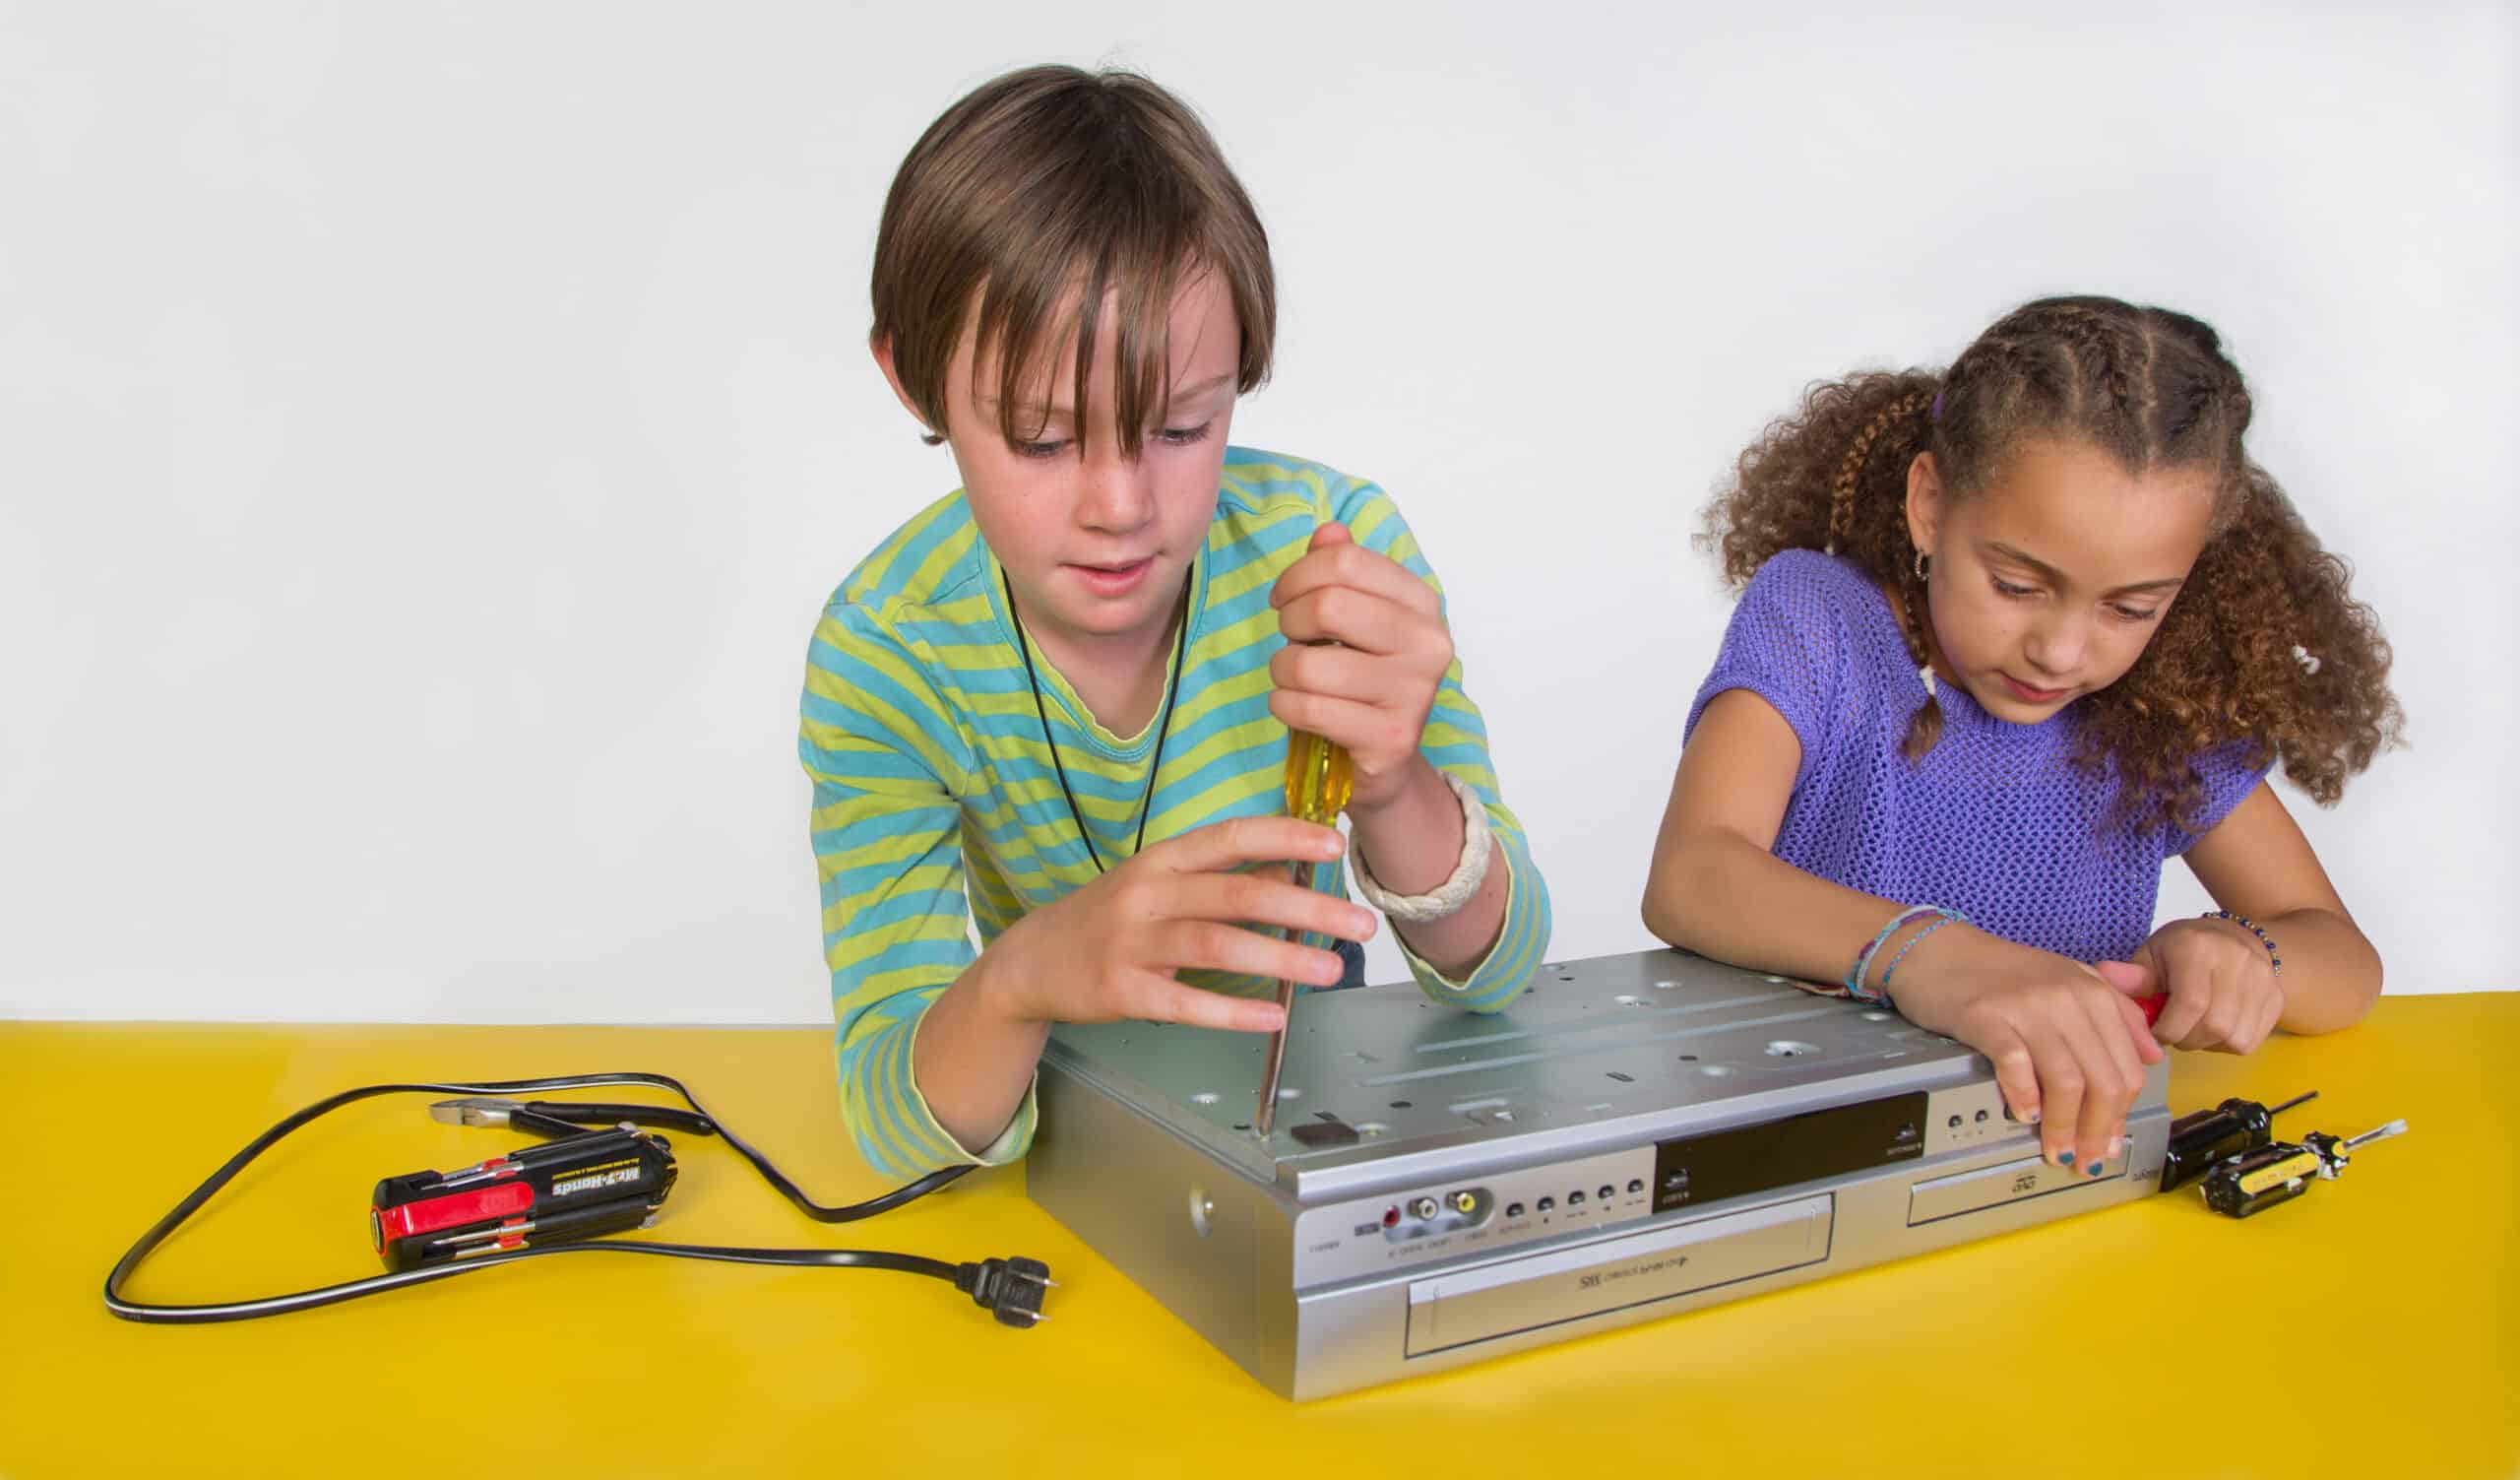 Two middle school girls (one holding a screwdriver) take apart a dvd/vcr machine